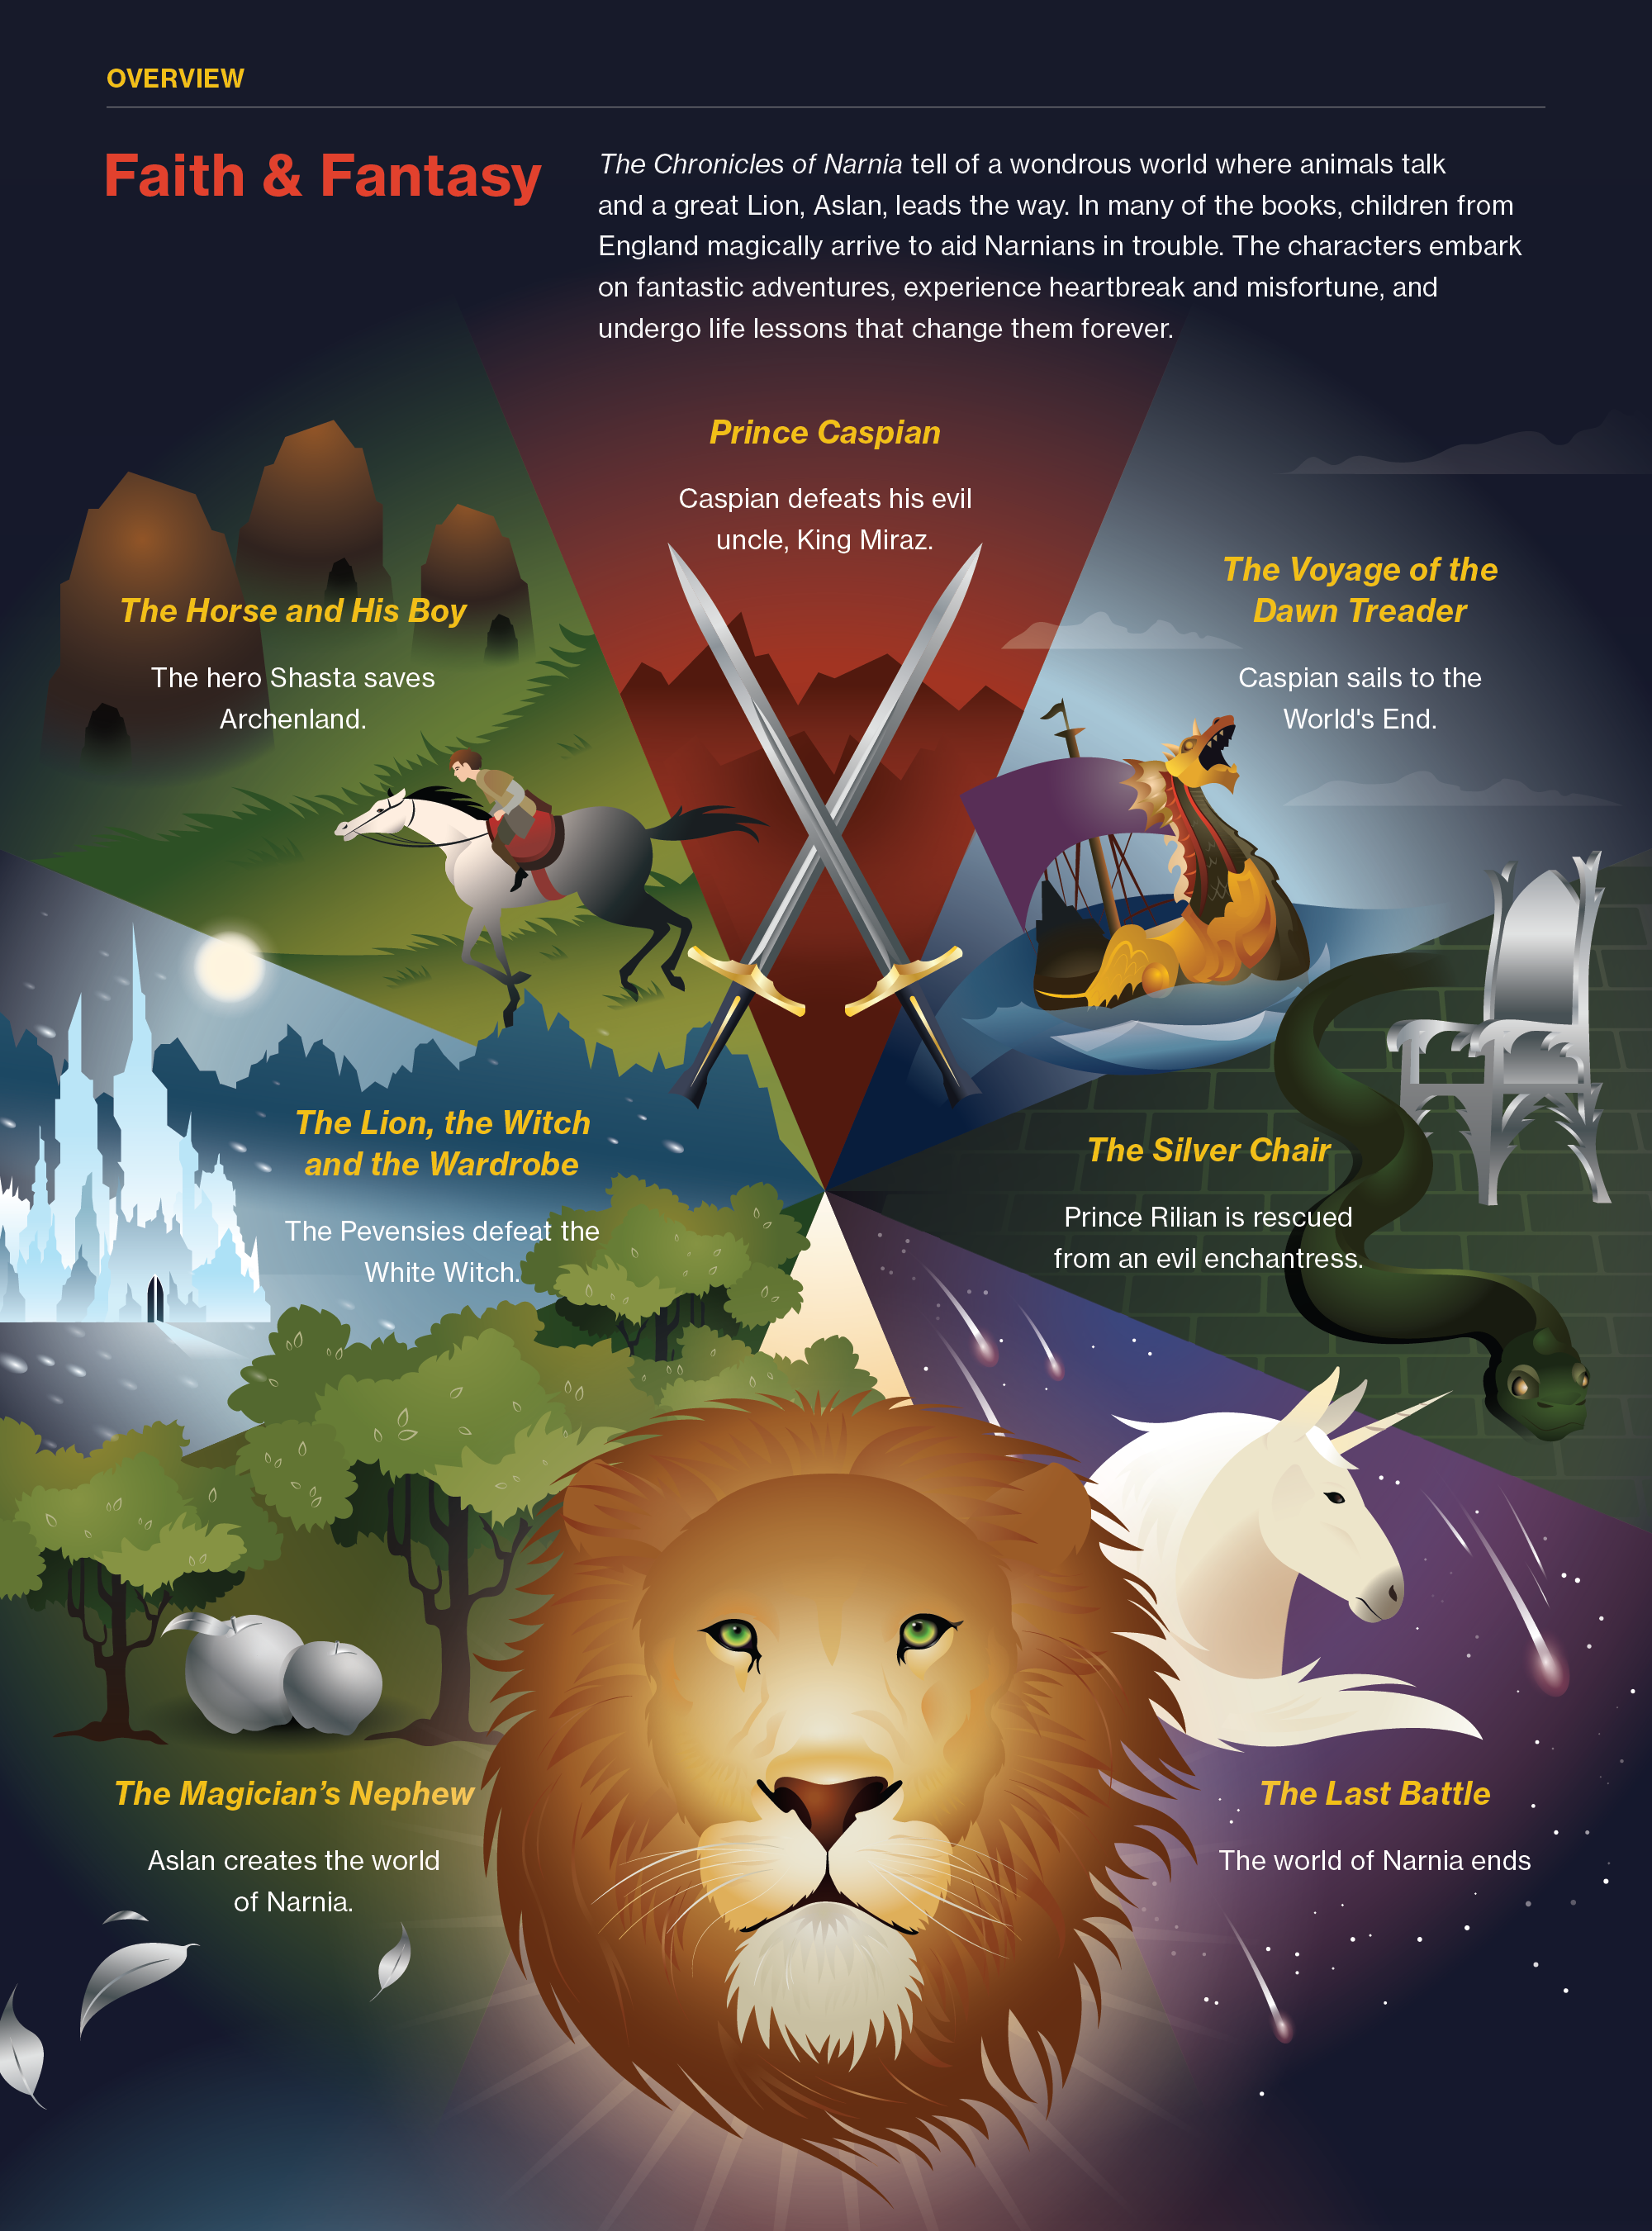 Wallpaper ship, Leo, heroes, The Chronicles Of Narnia, Aslan, The